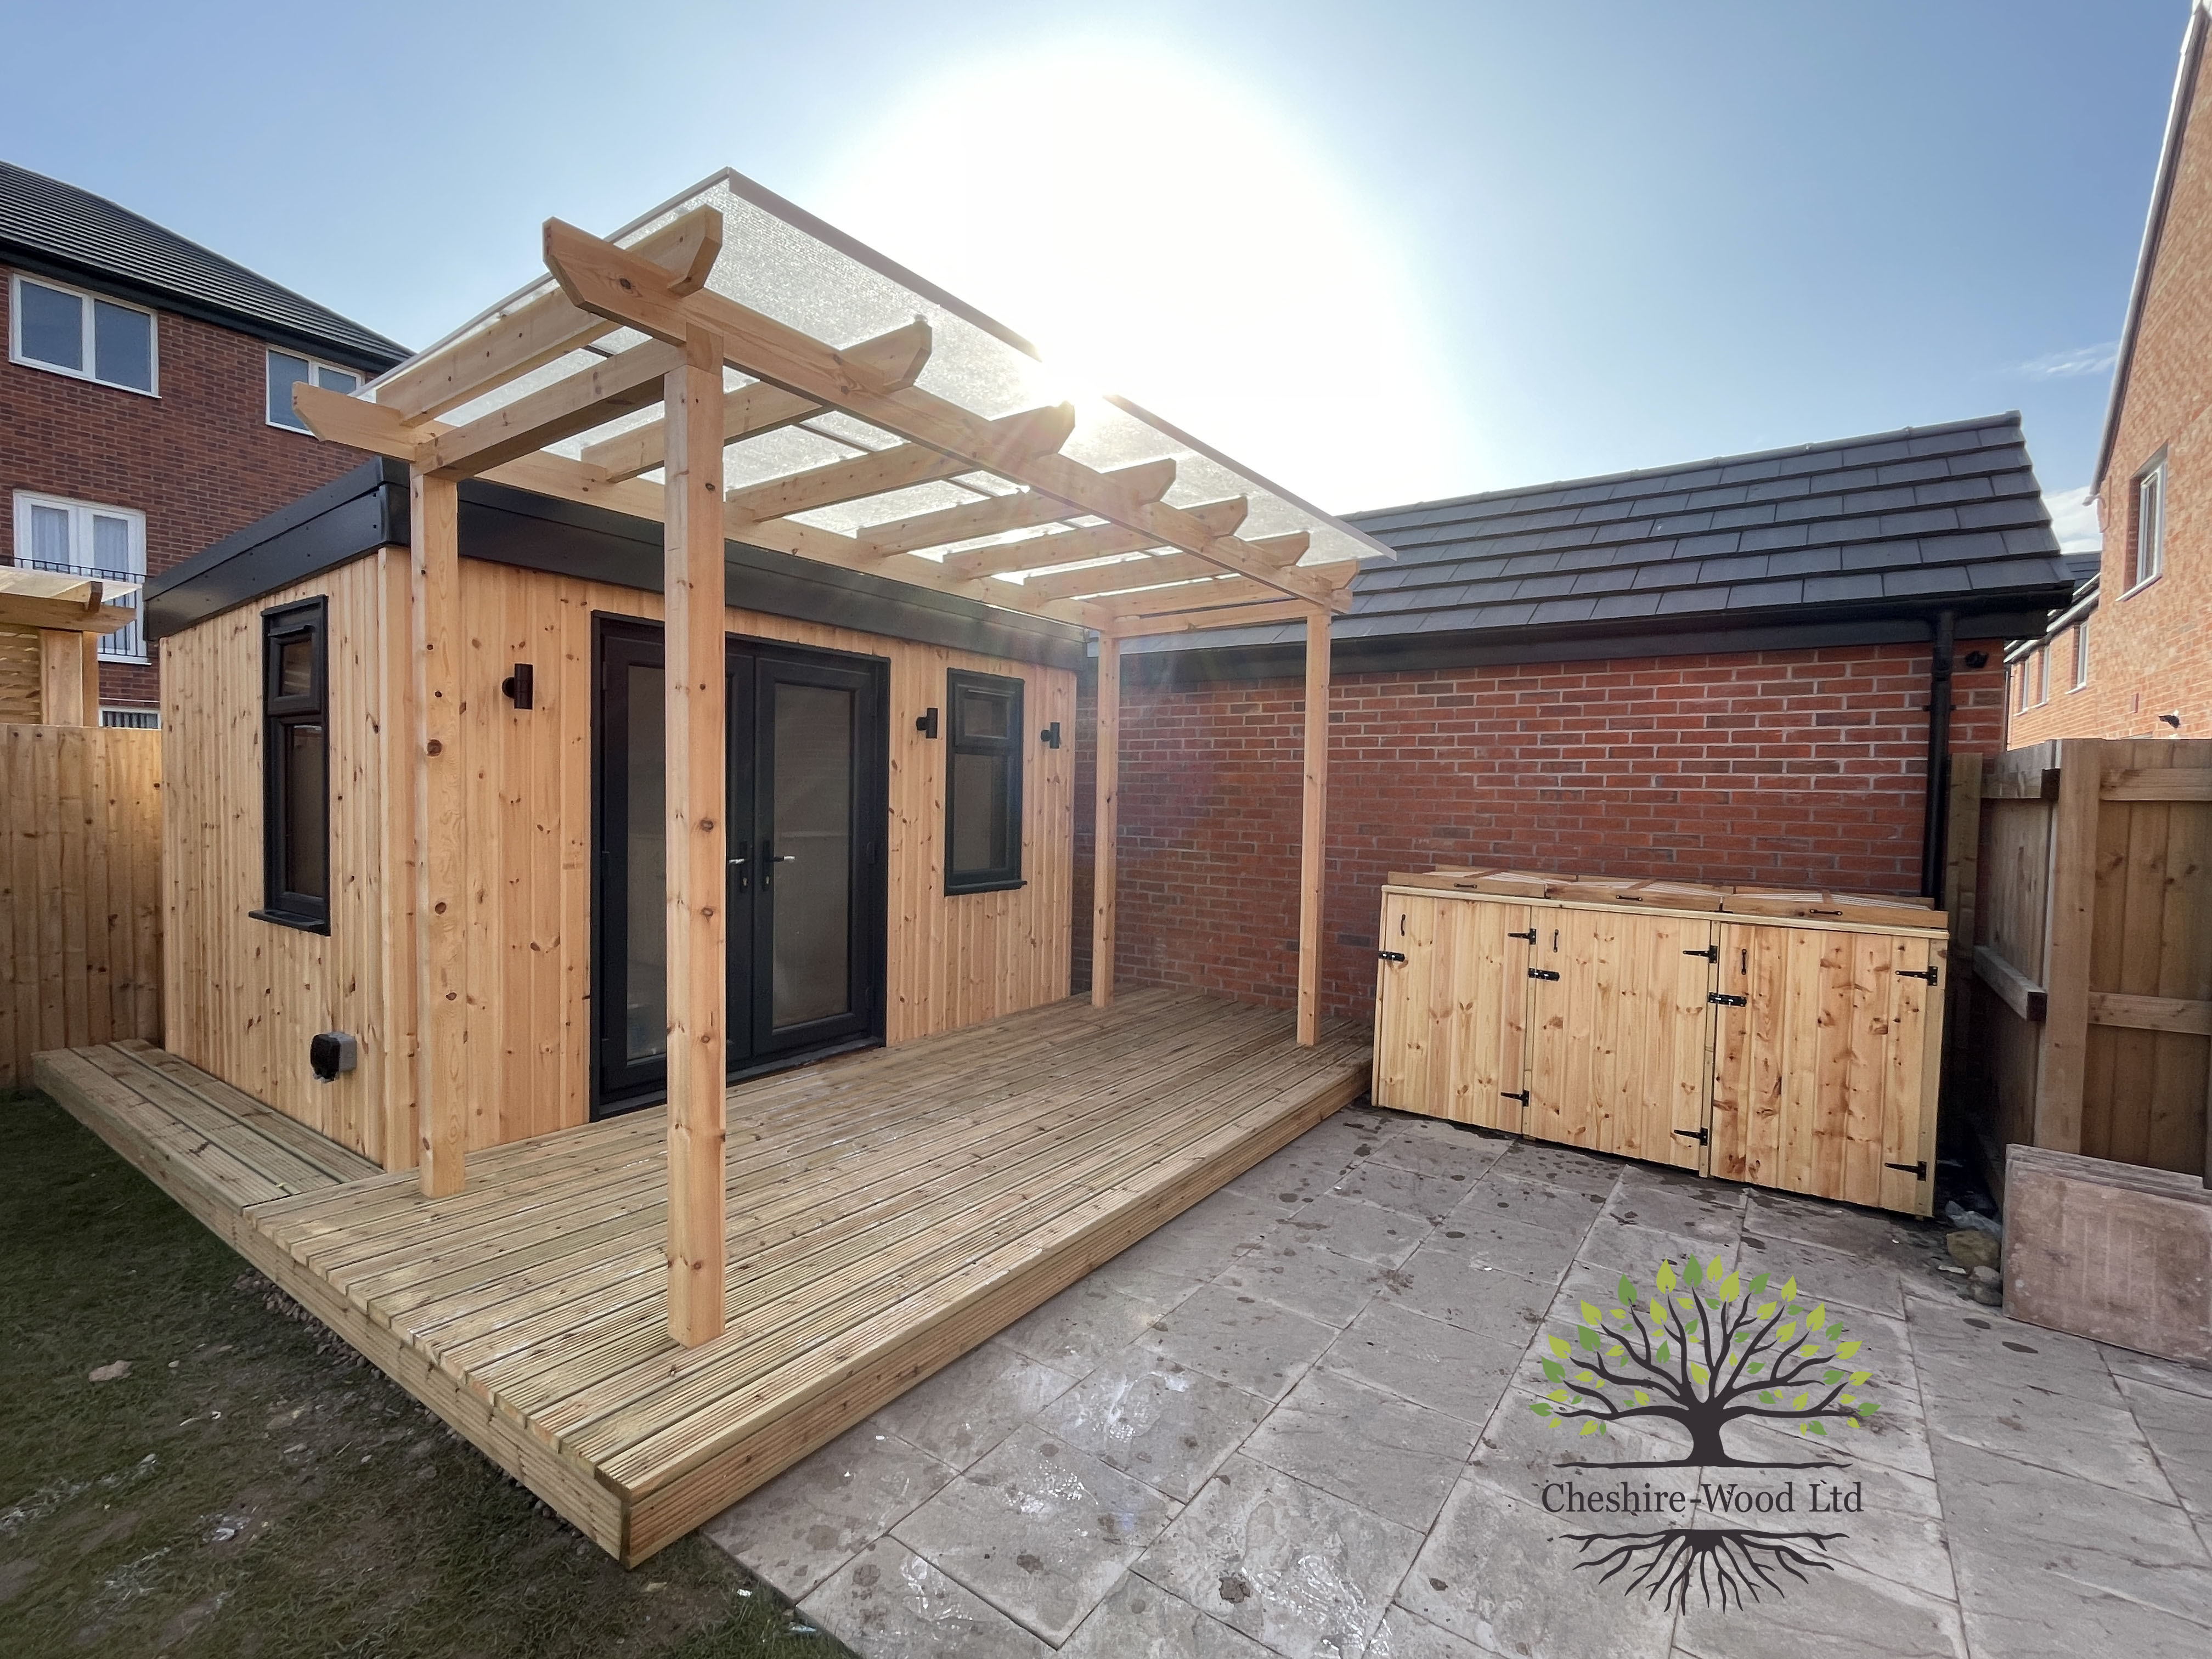 Image of Garden Room and Pergola created by Cheshire Wood